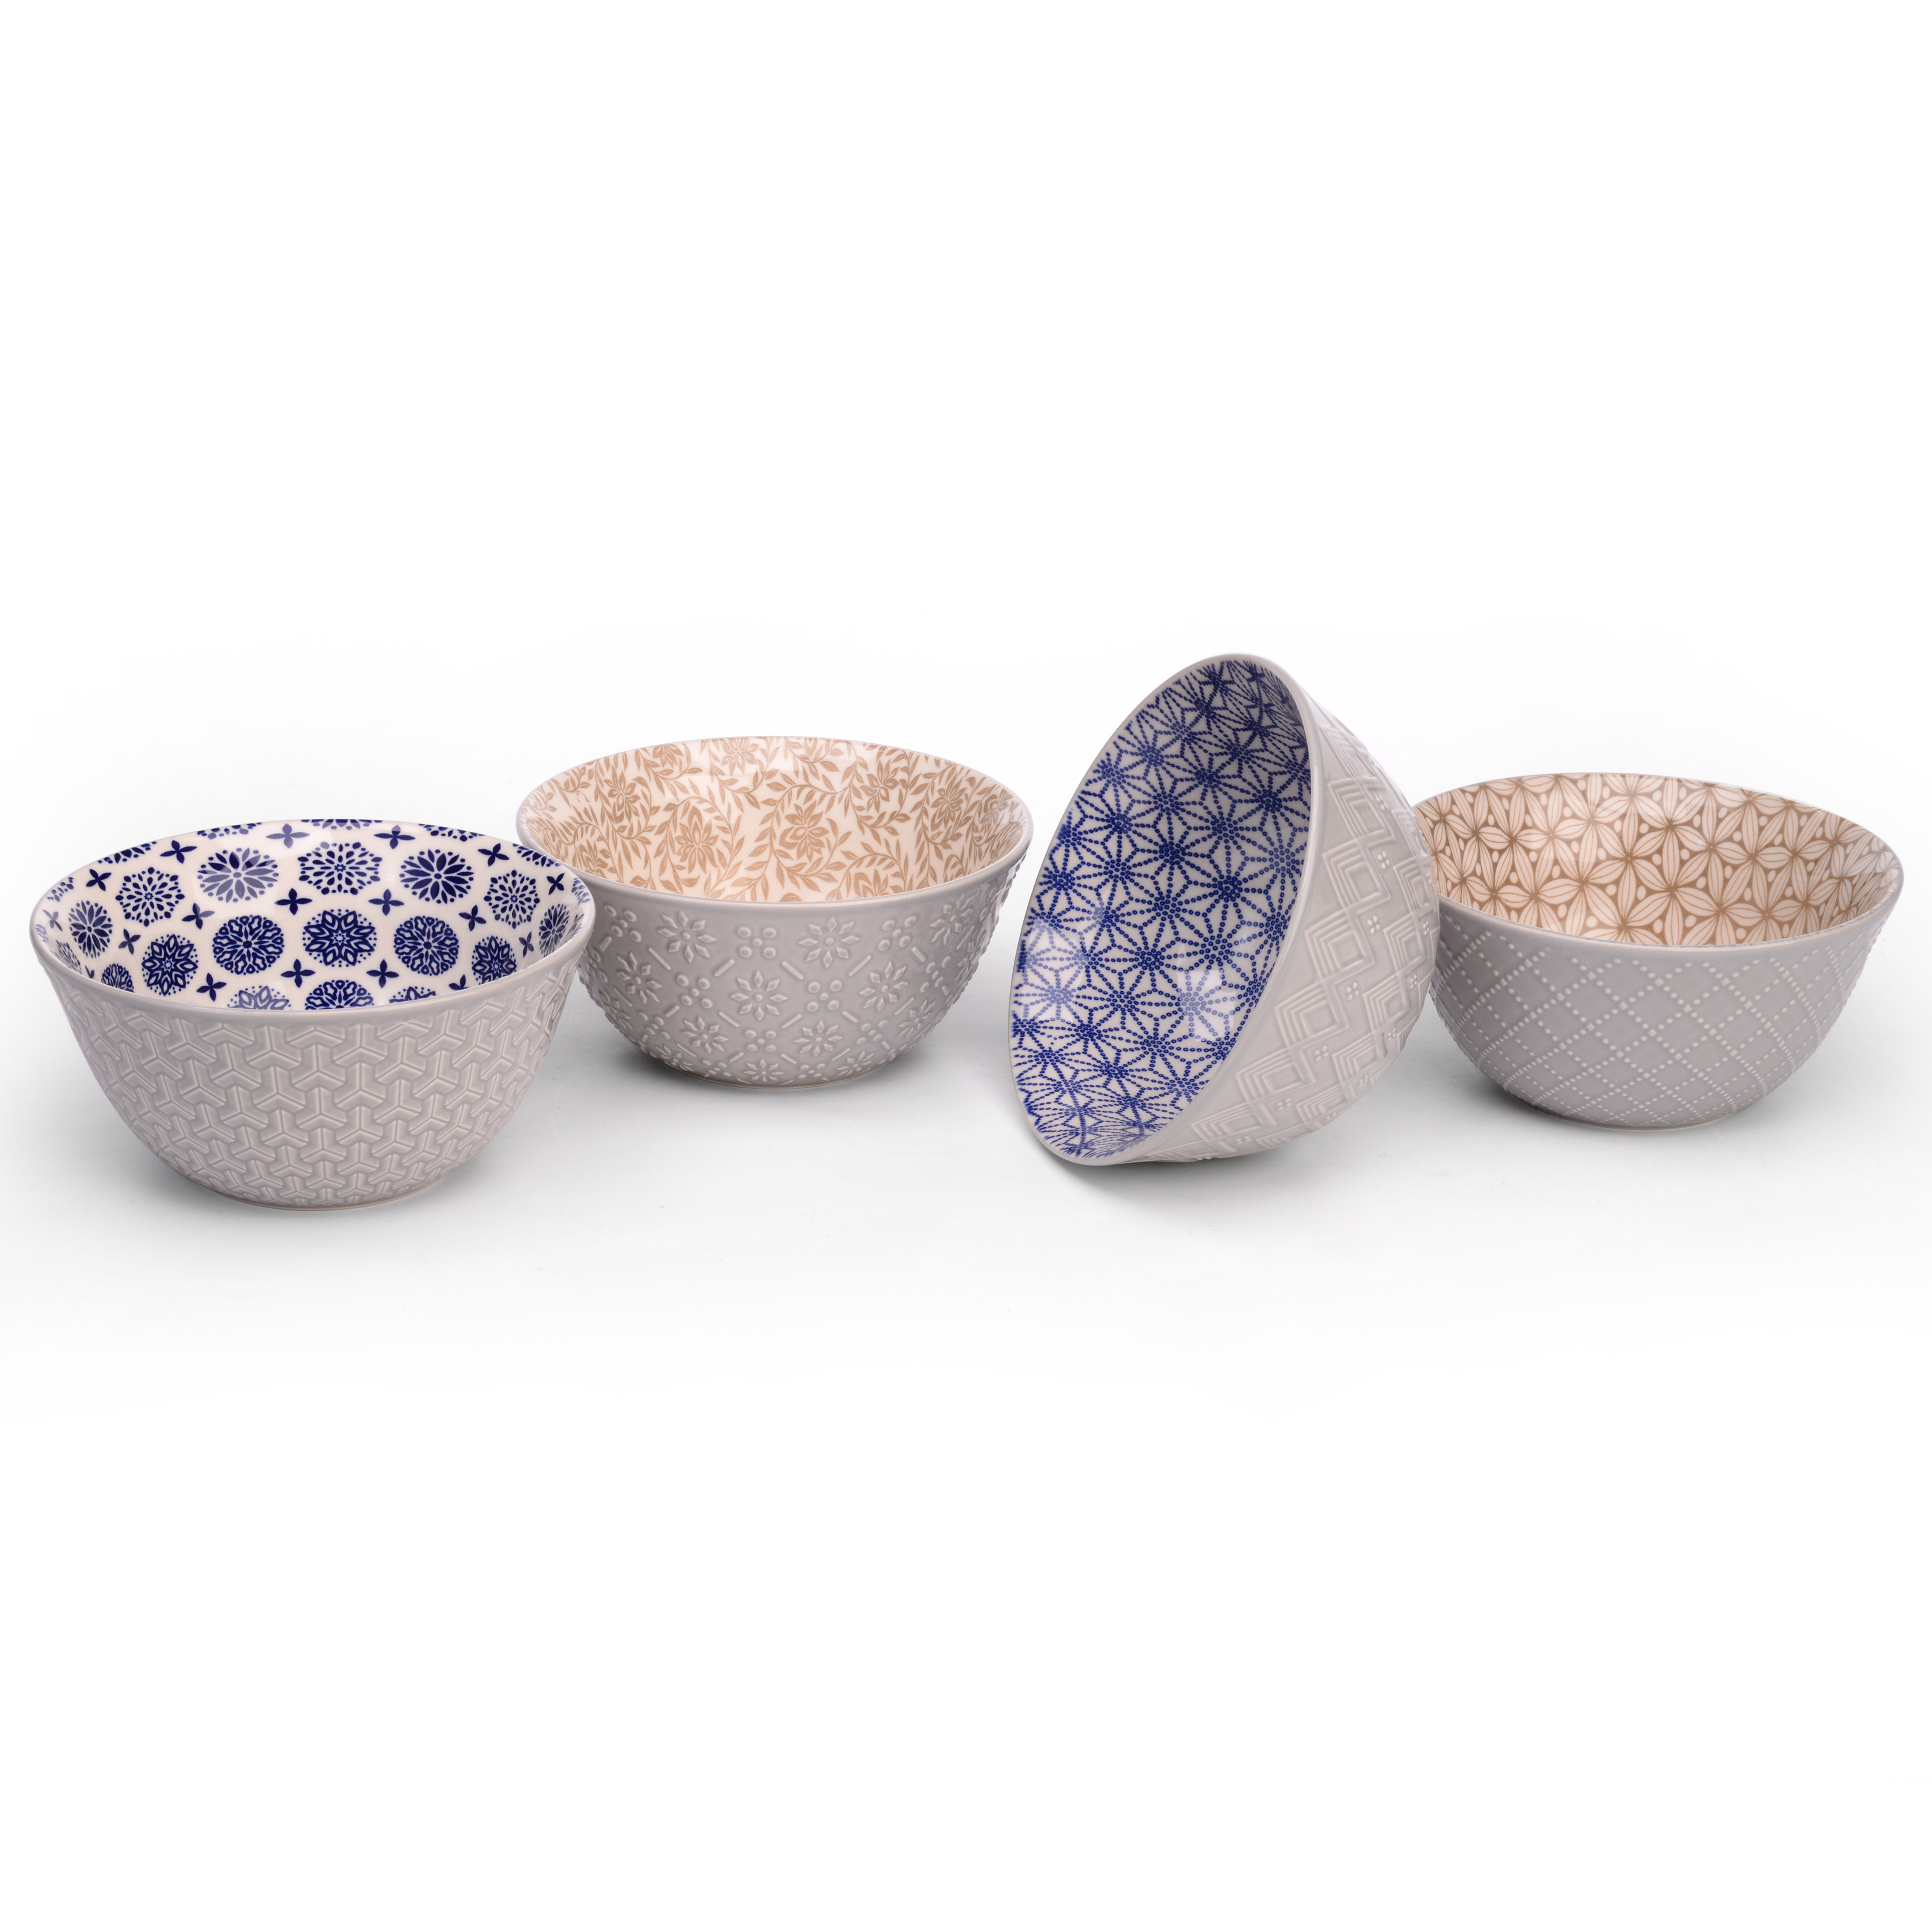 Signature Microwavable Bowls with lids Assorted Sizes